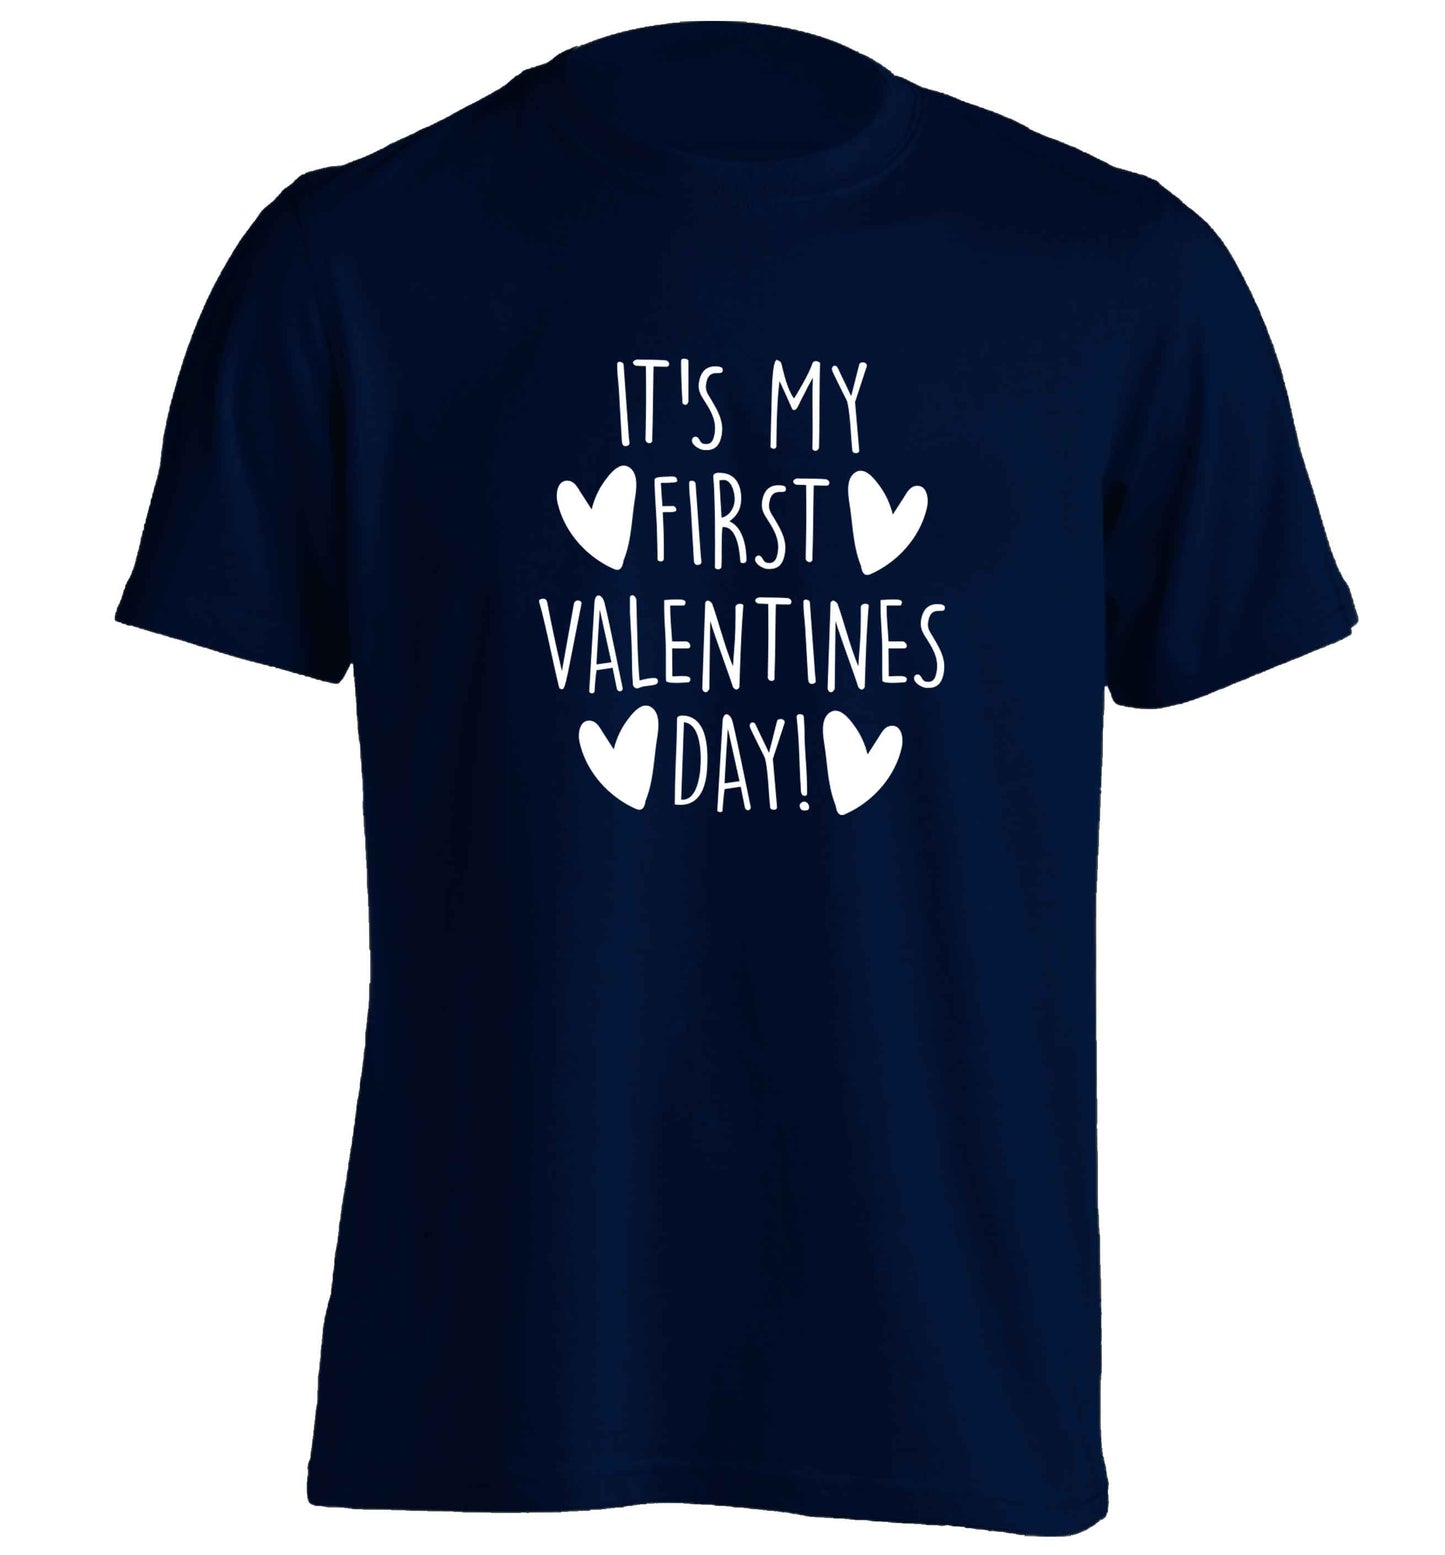 It's my first valentines day! adults unisex navy Tshirt 2XL